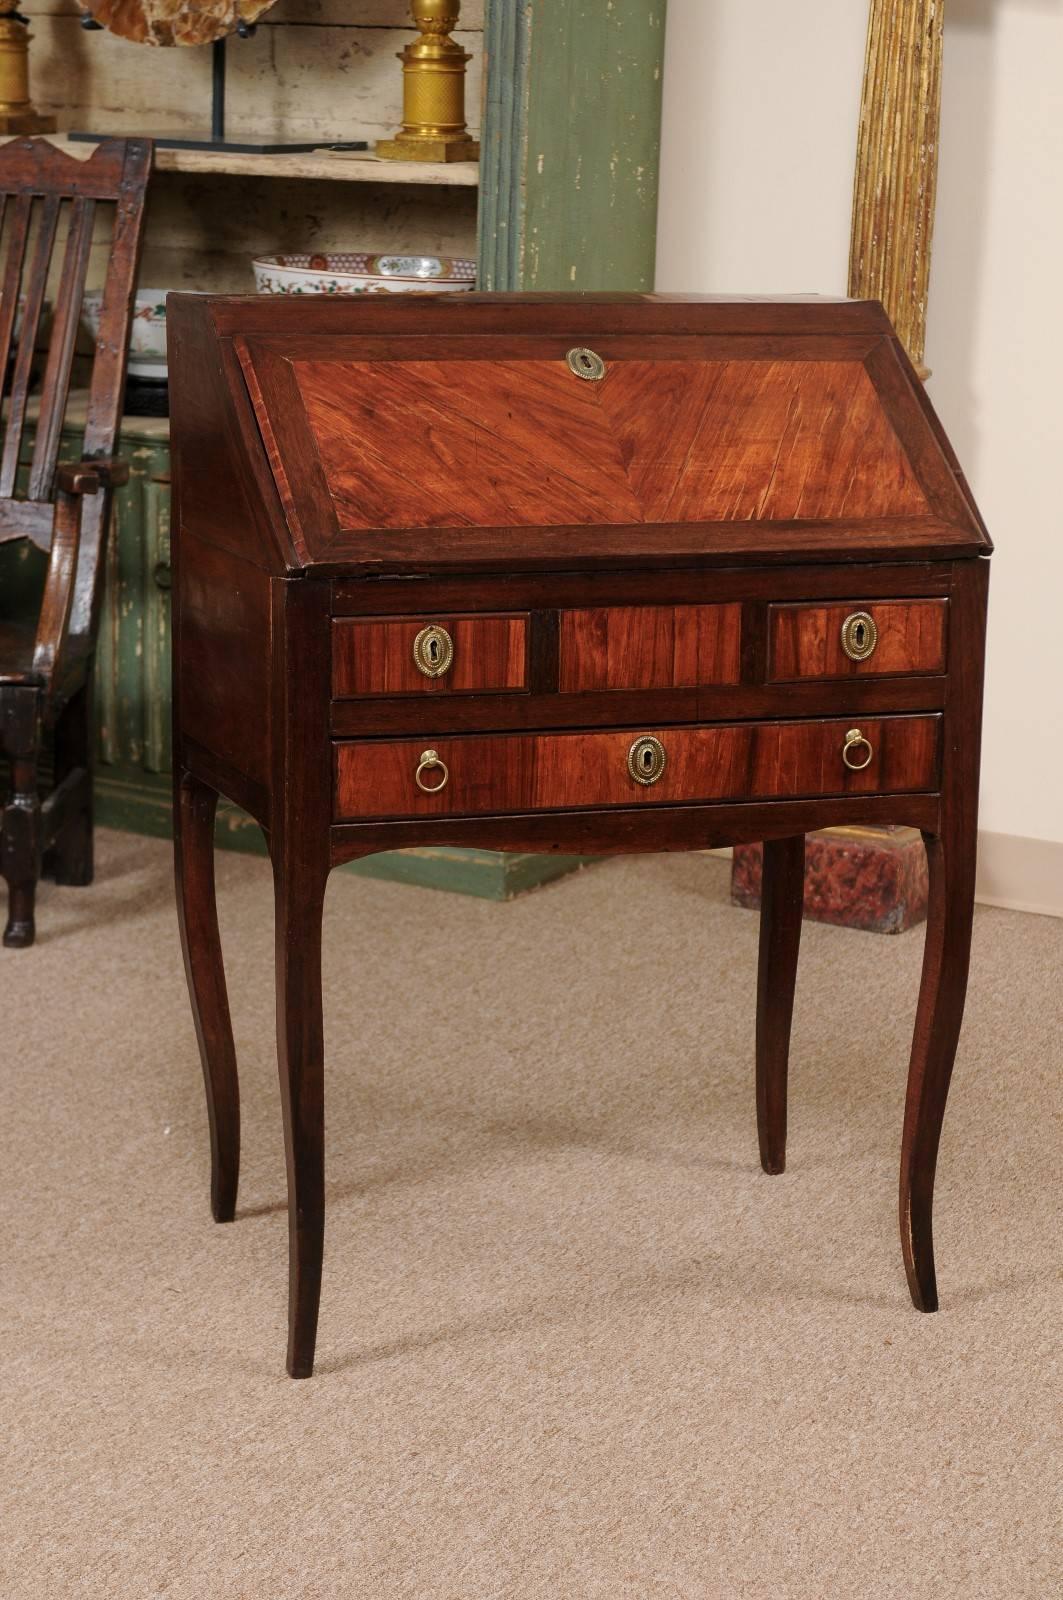 Petite slant-front bureau in kingwood with fitted interior & leather blotter.